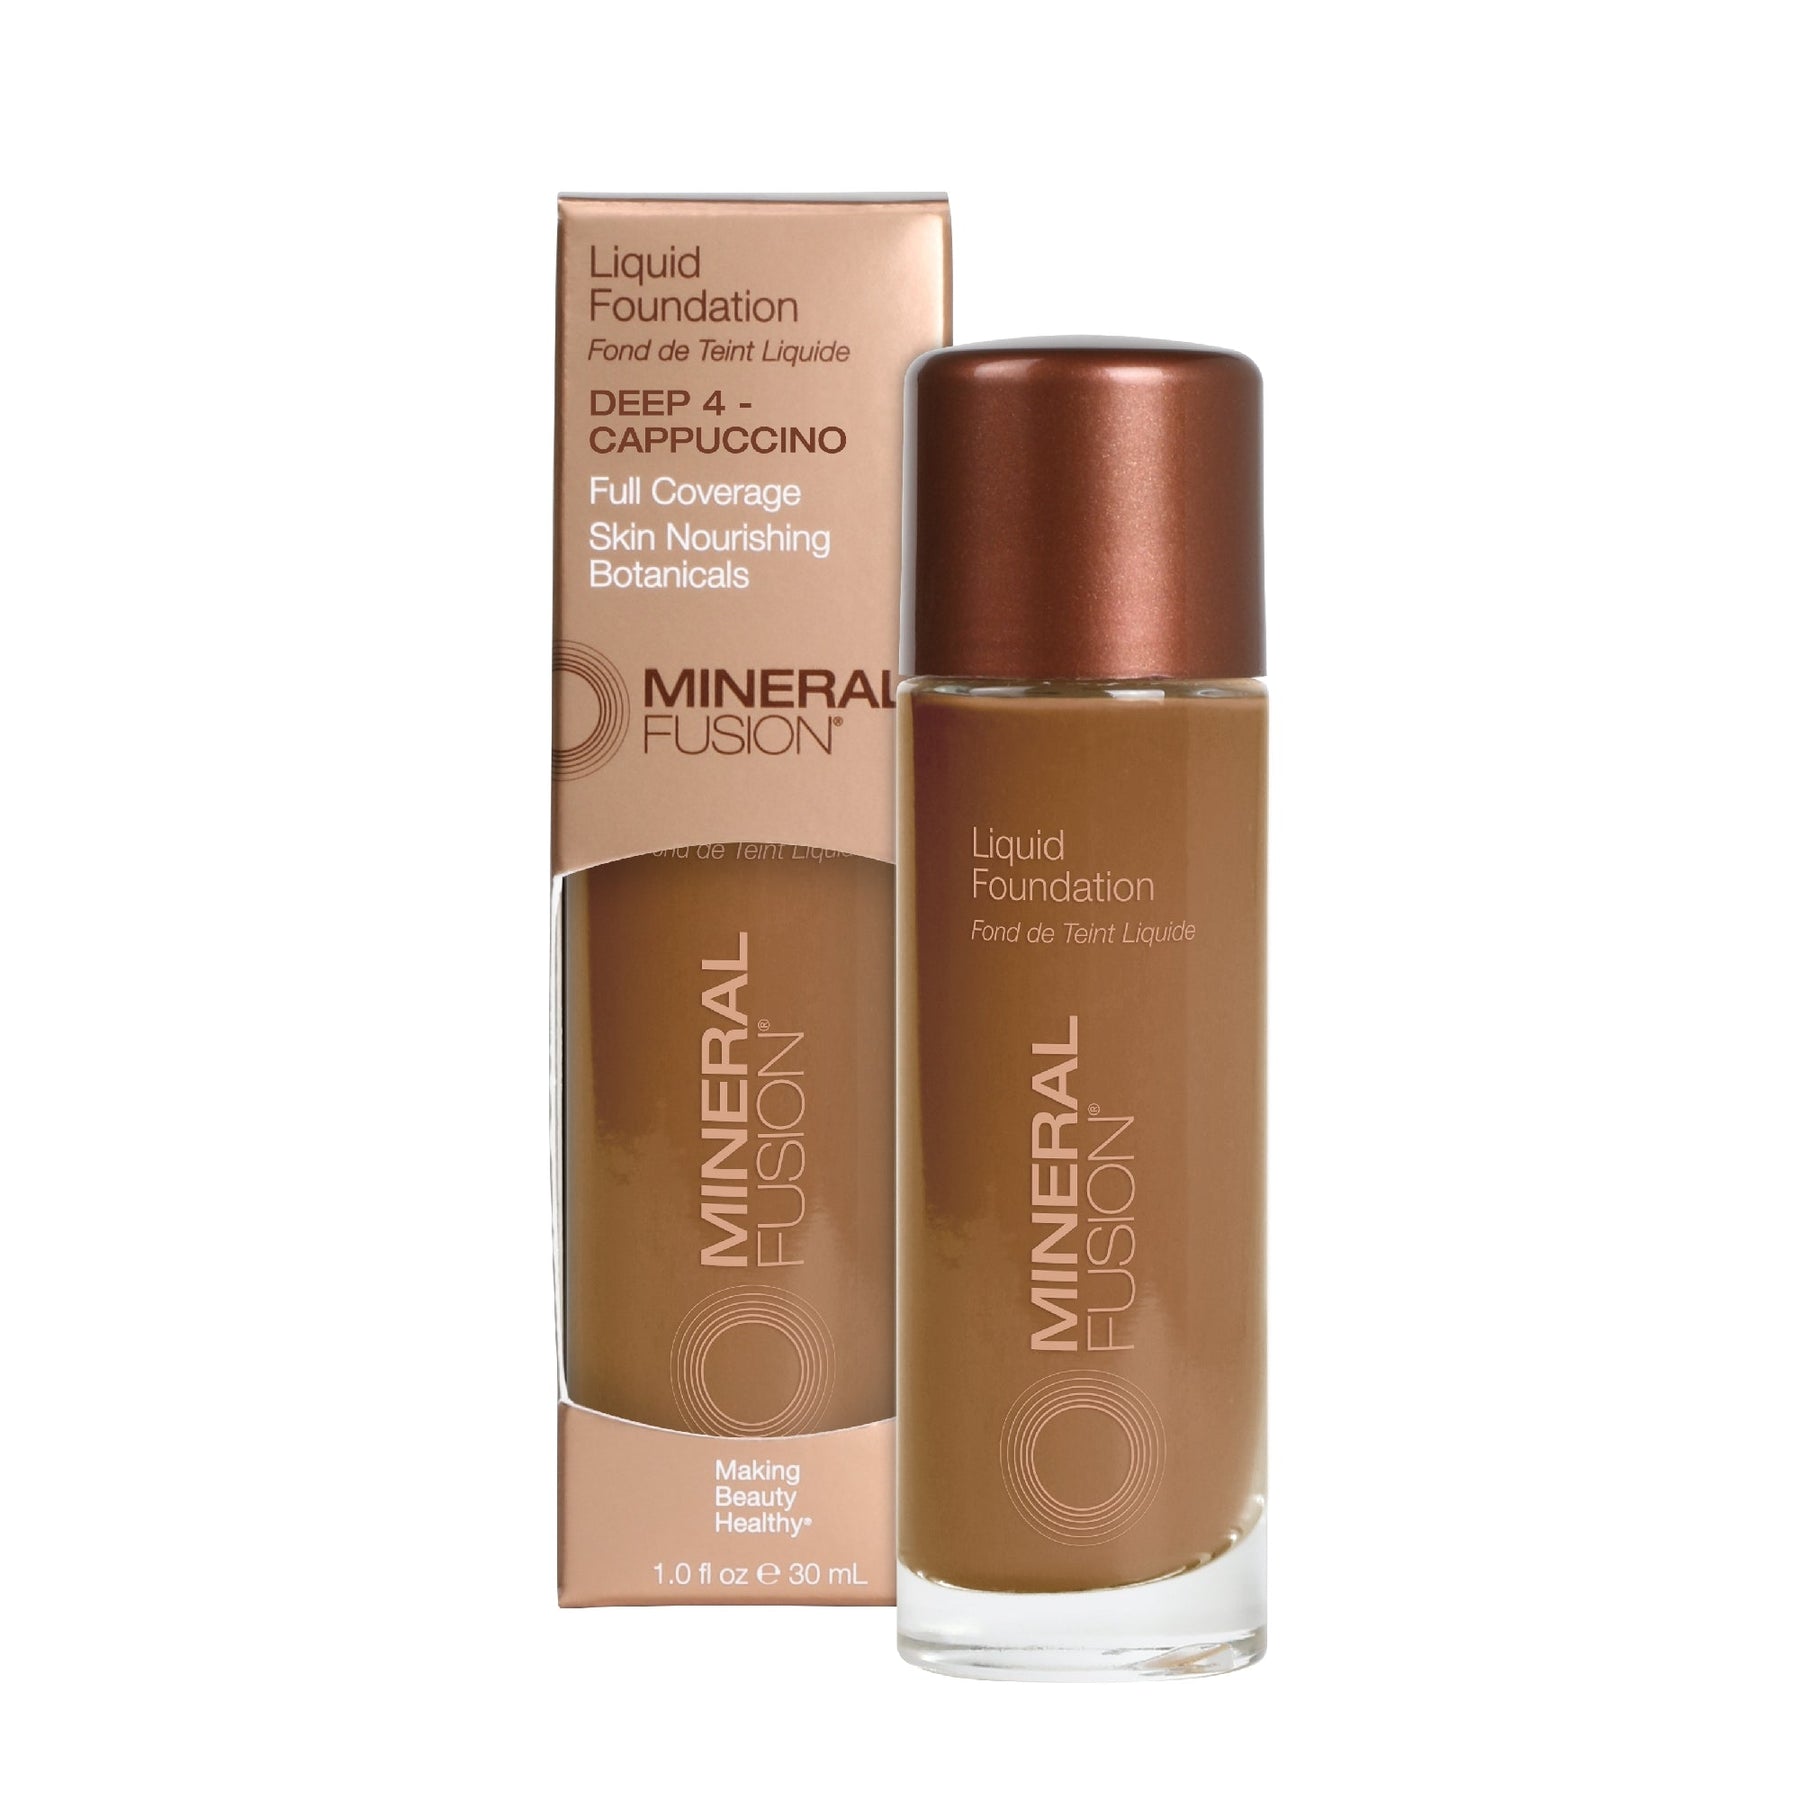 Liquid Foundation - Deep 4 - Cappuccinio / 1.0 fl.oz - by Mineral Fusion |ProCare Outlet|